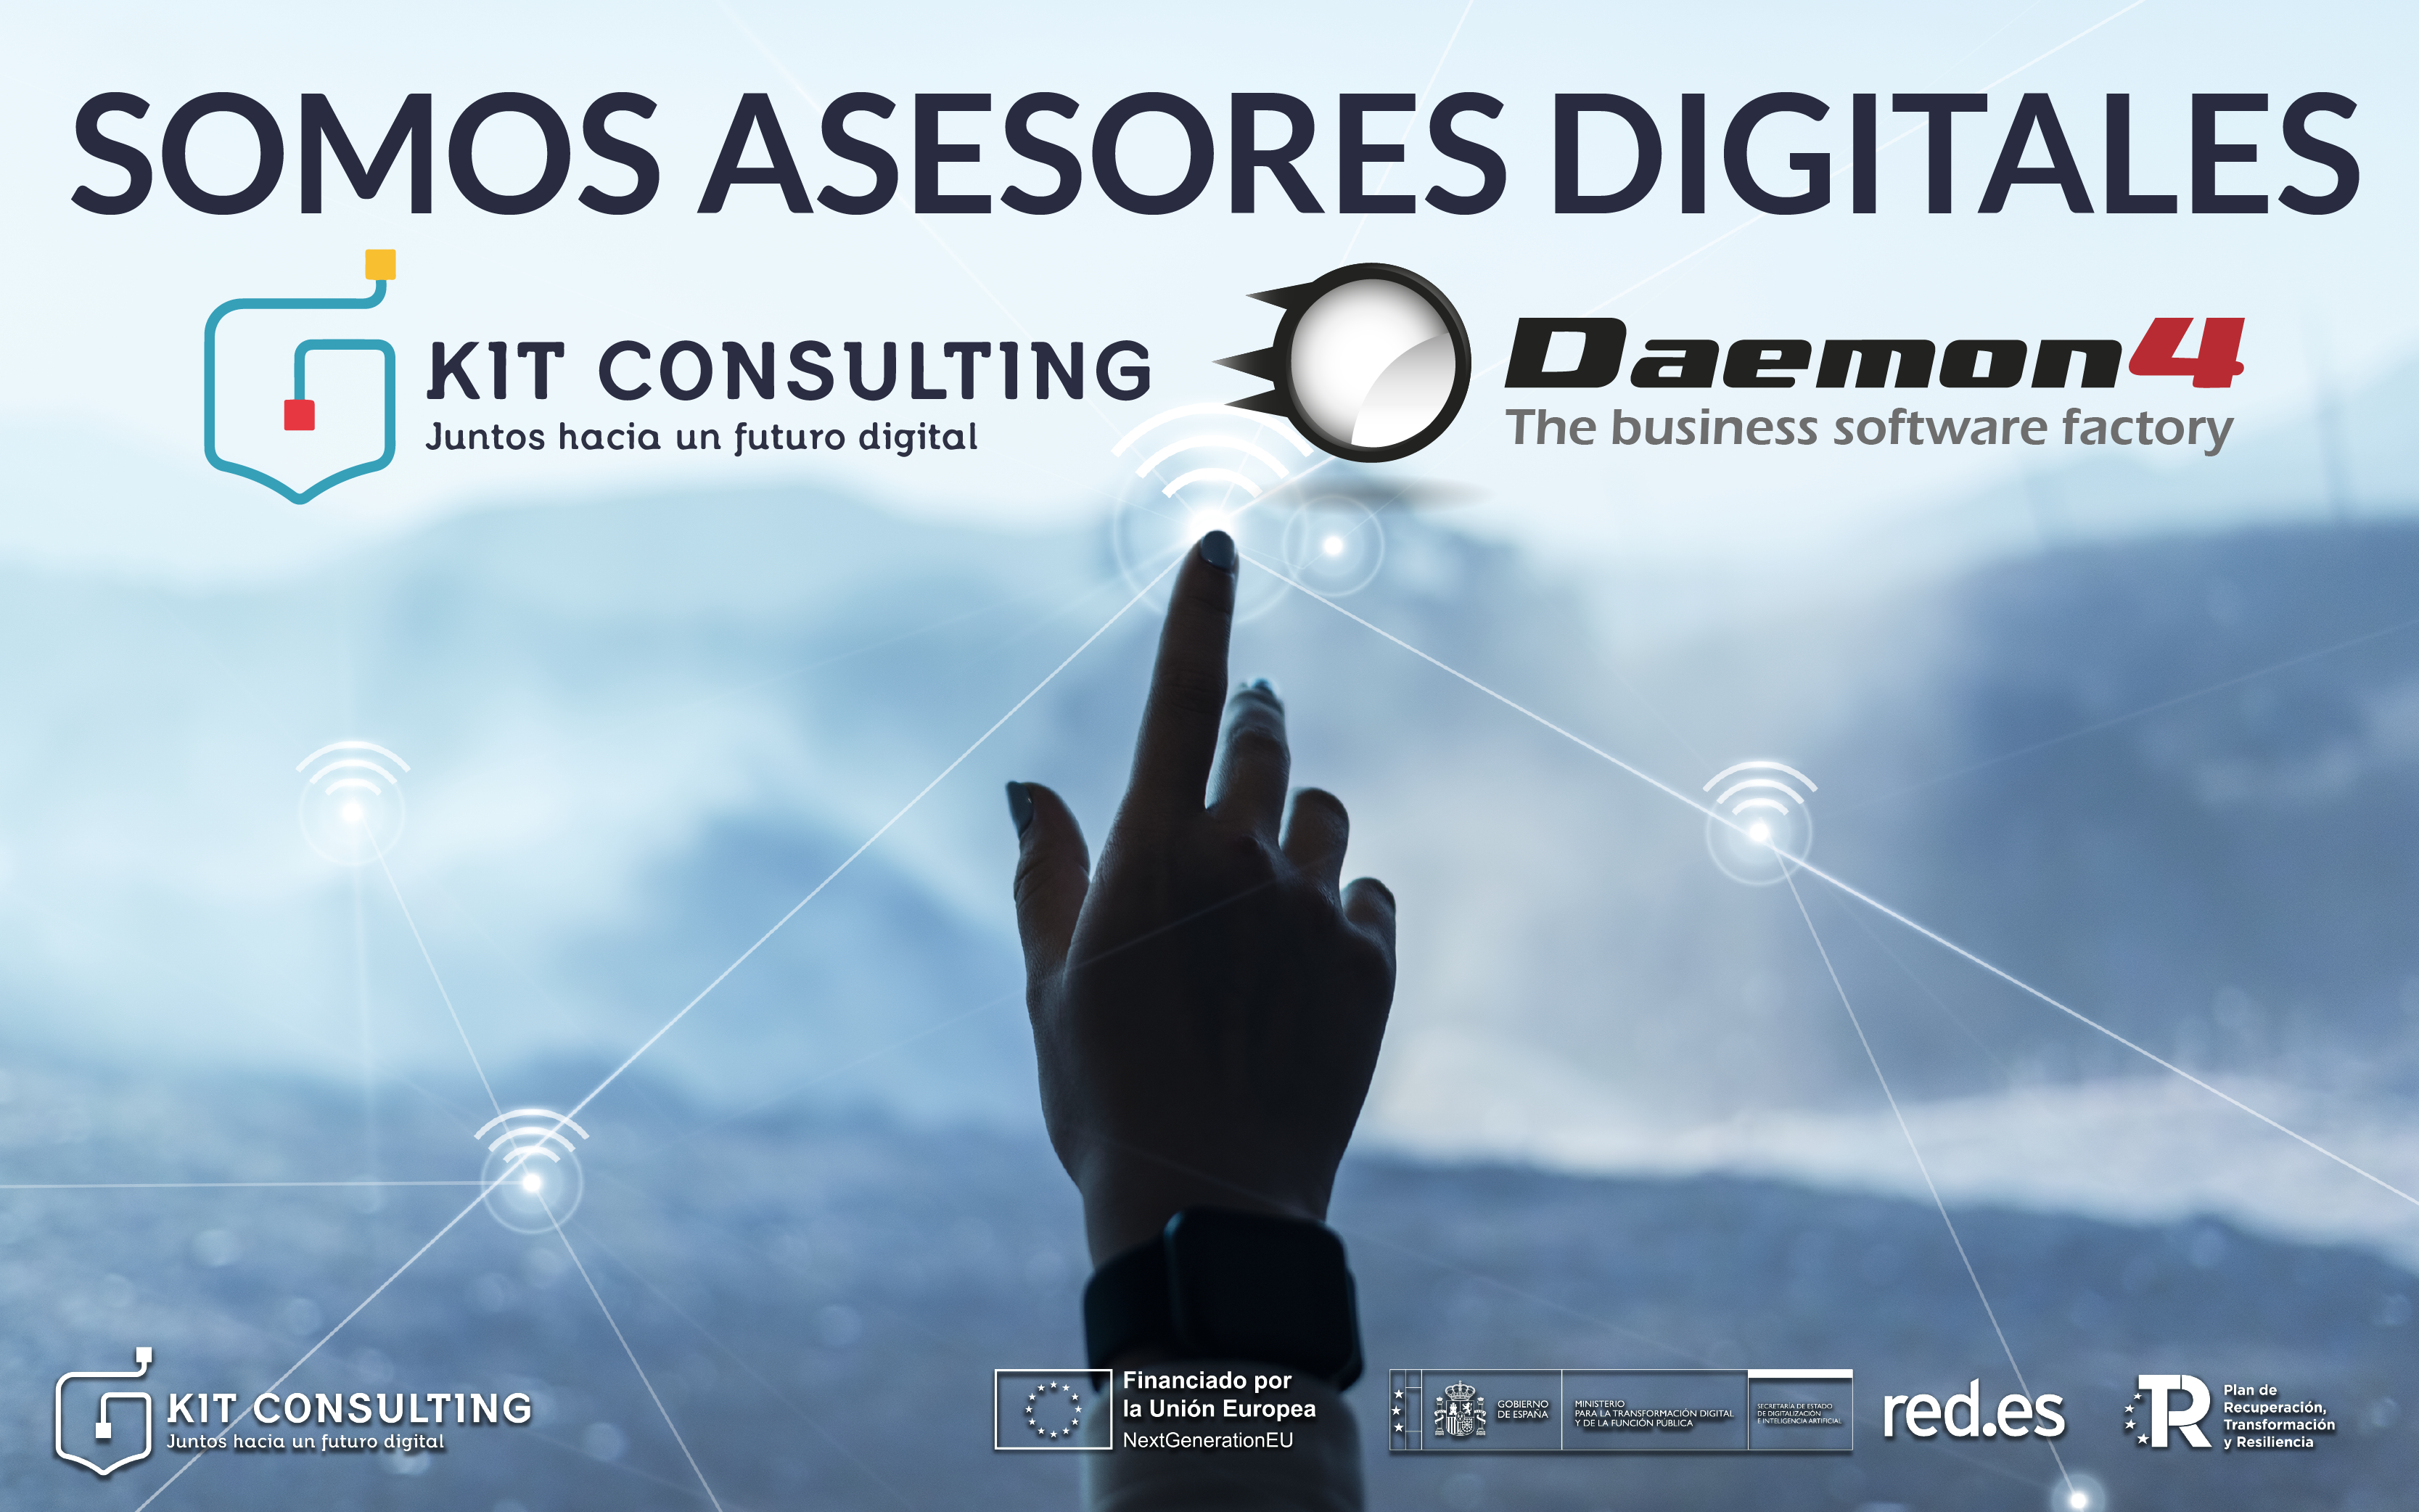 Somos asesores digitales Kit consulting